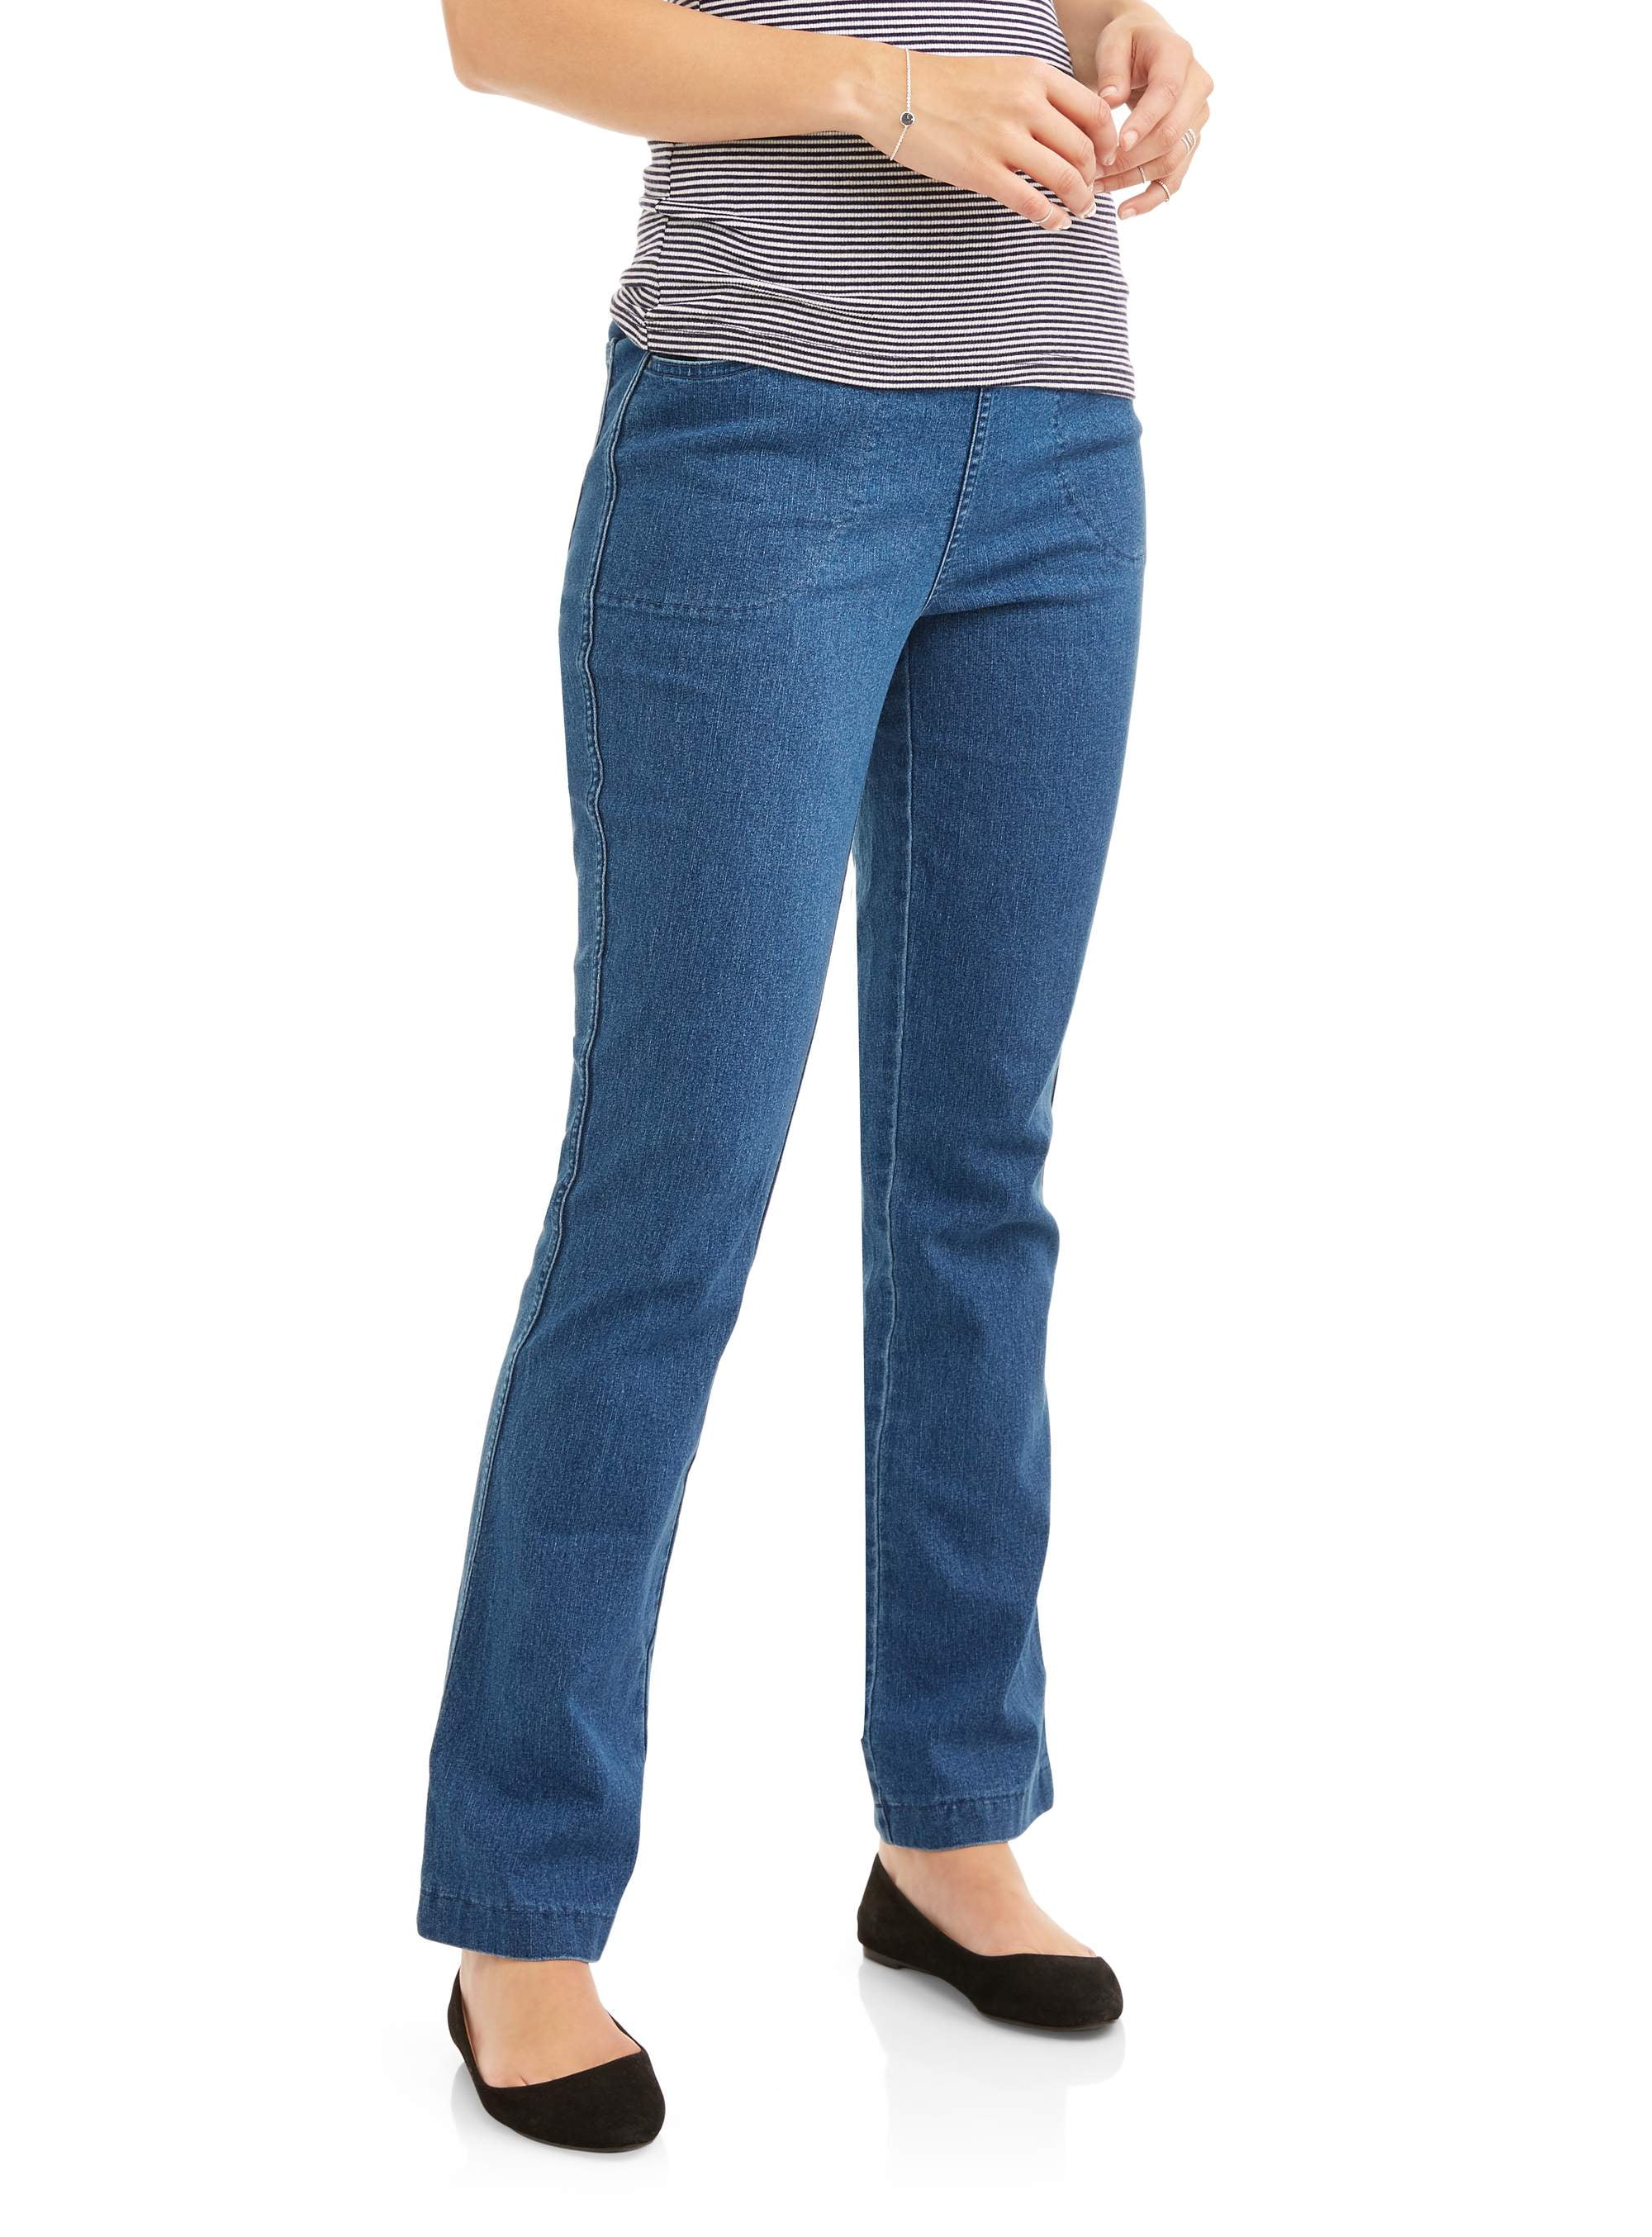 RealSize Women's 4 Pocket Stretch Pull On Bootcut Jeans - Walmart.com